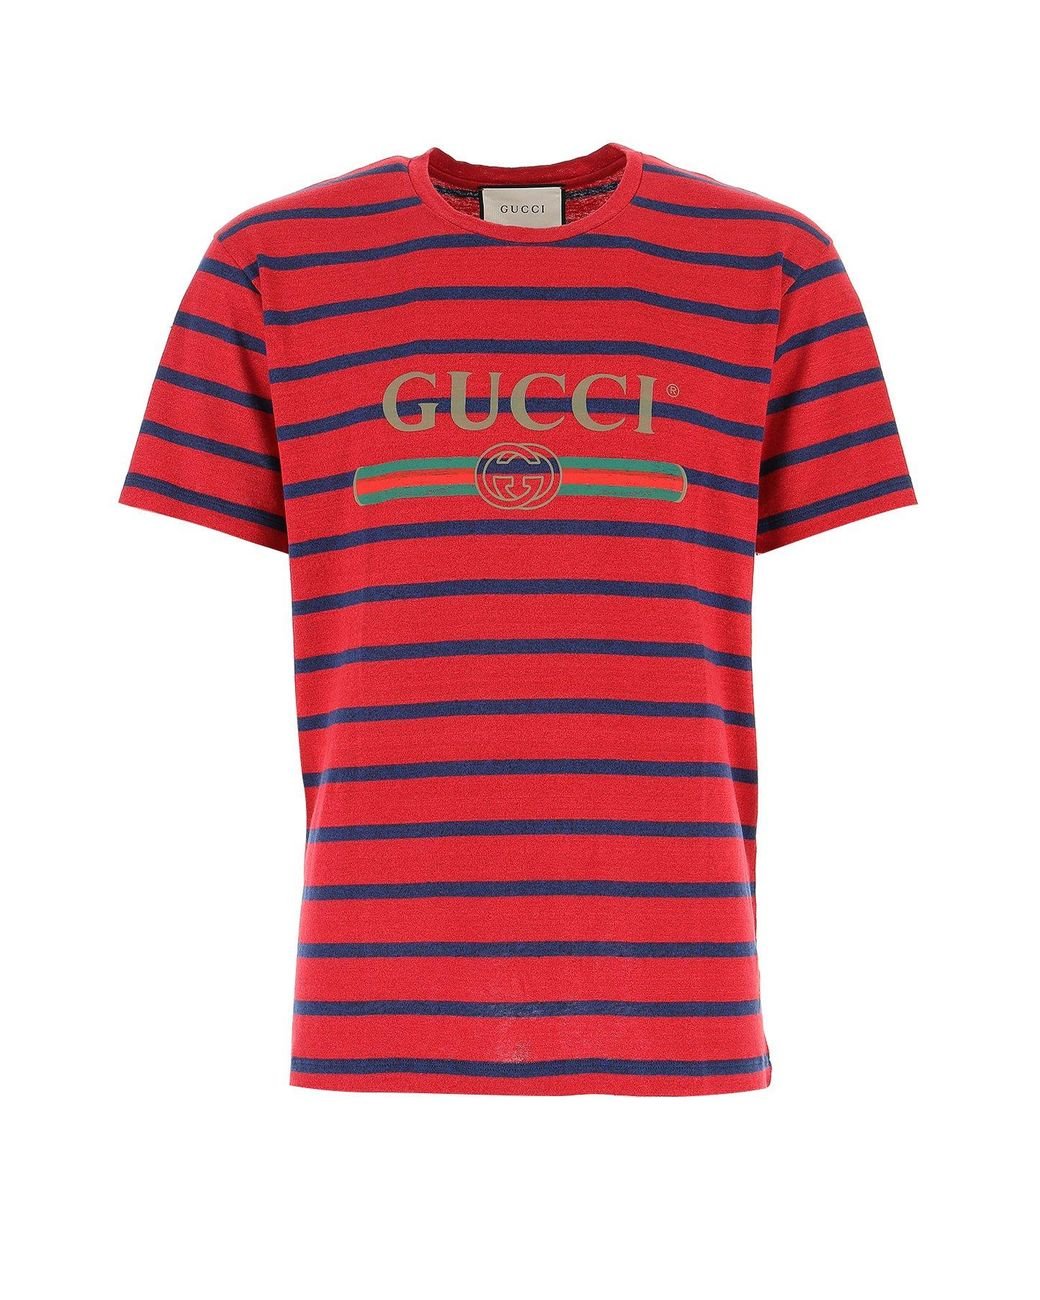 Gucci Logo Striped T-shirt in Red for Men - Save 69% - Lyst